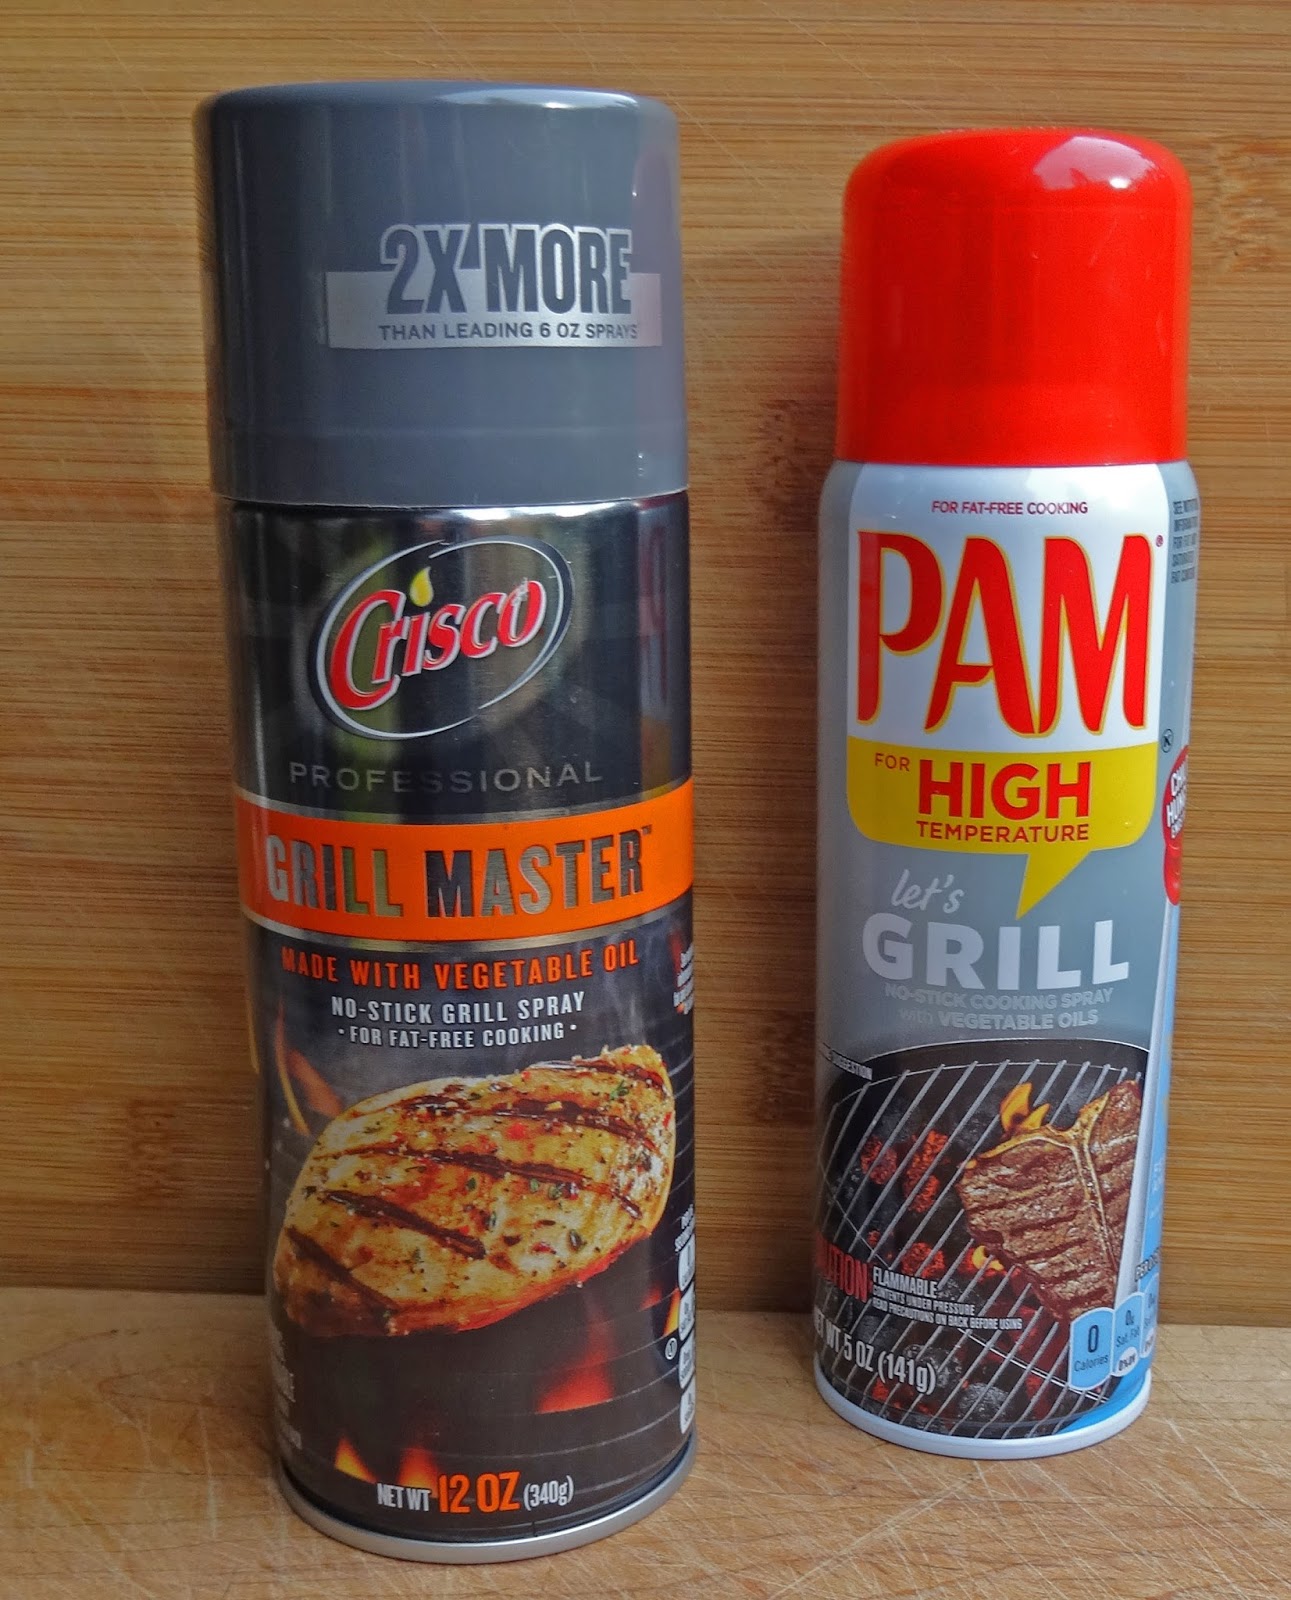 Crisco Professional No-Stick Cooking Spray Grill Master 12 Ounce